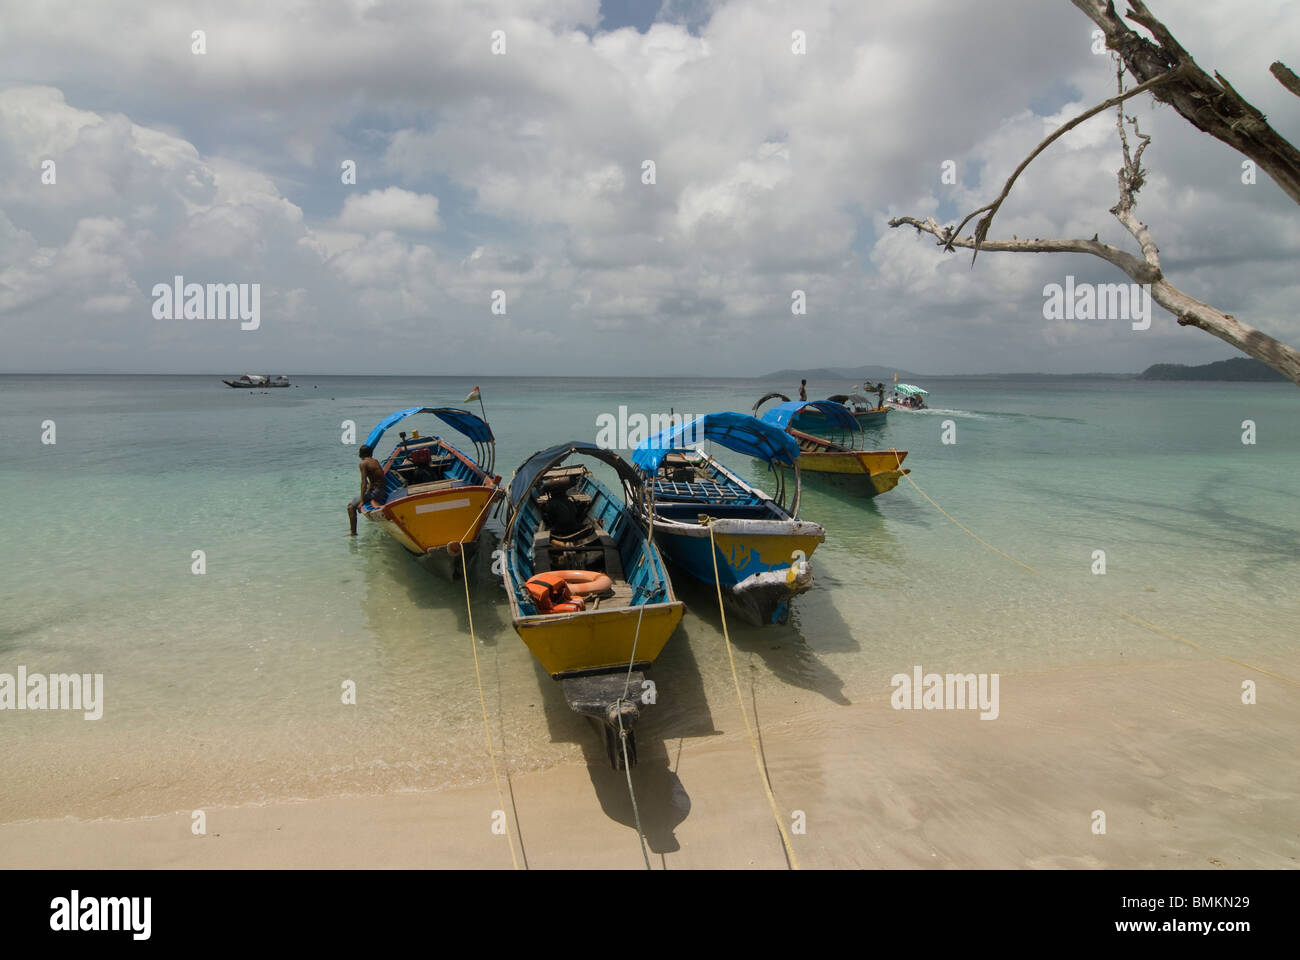 Boats at coast in turquoise Indian Ocean,Havelock Island, Andaman Islands,India Stock Photo